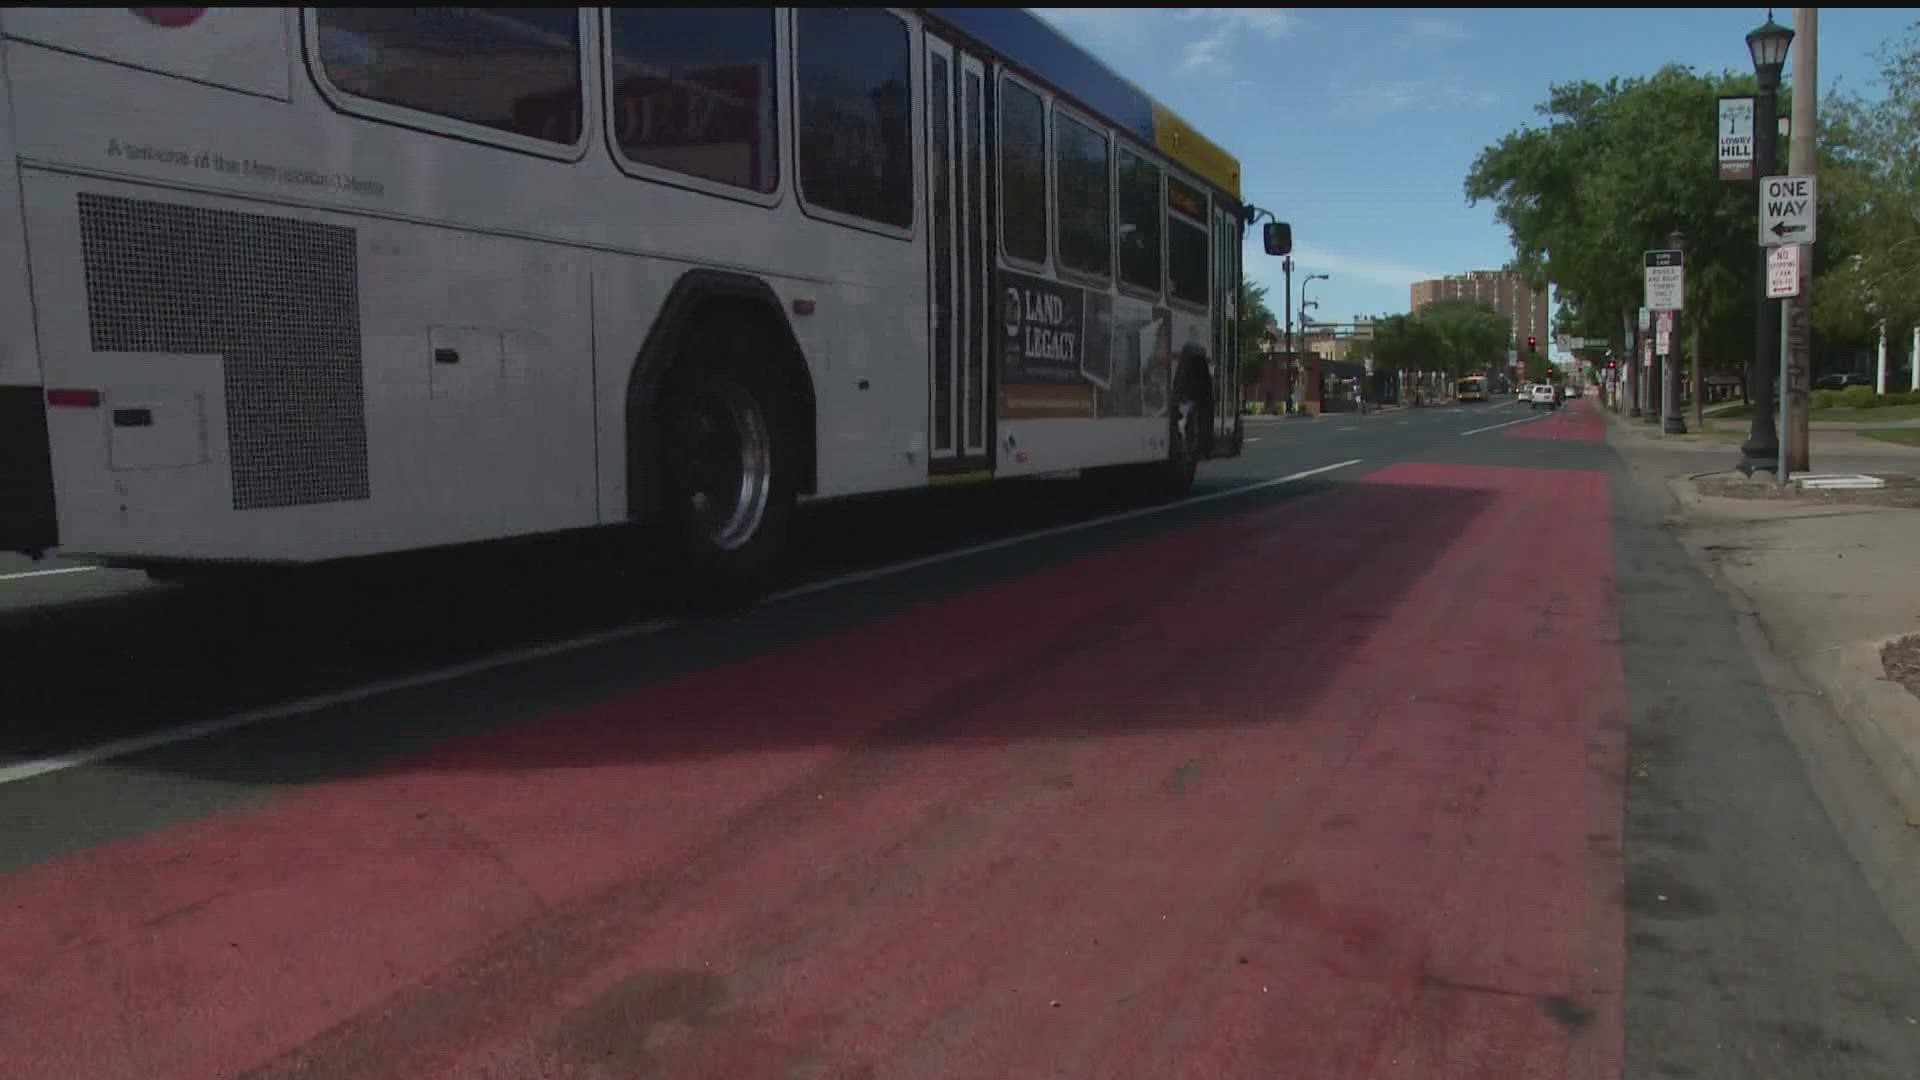 Council members are pushing for full-time bus lanes, but Mayor Frey vetoed a proposal over concerns about businesses losing parking.